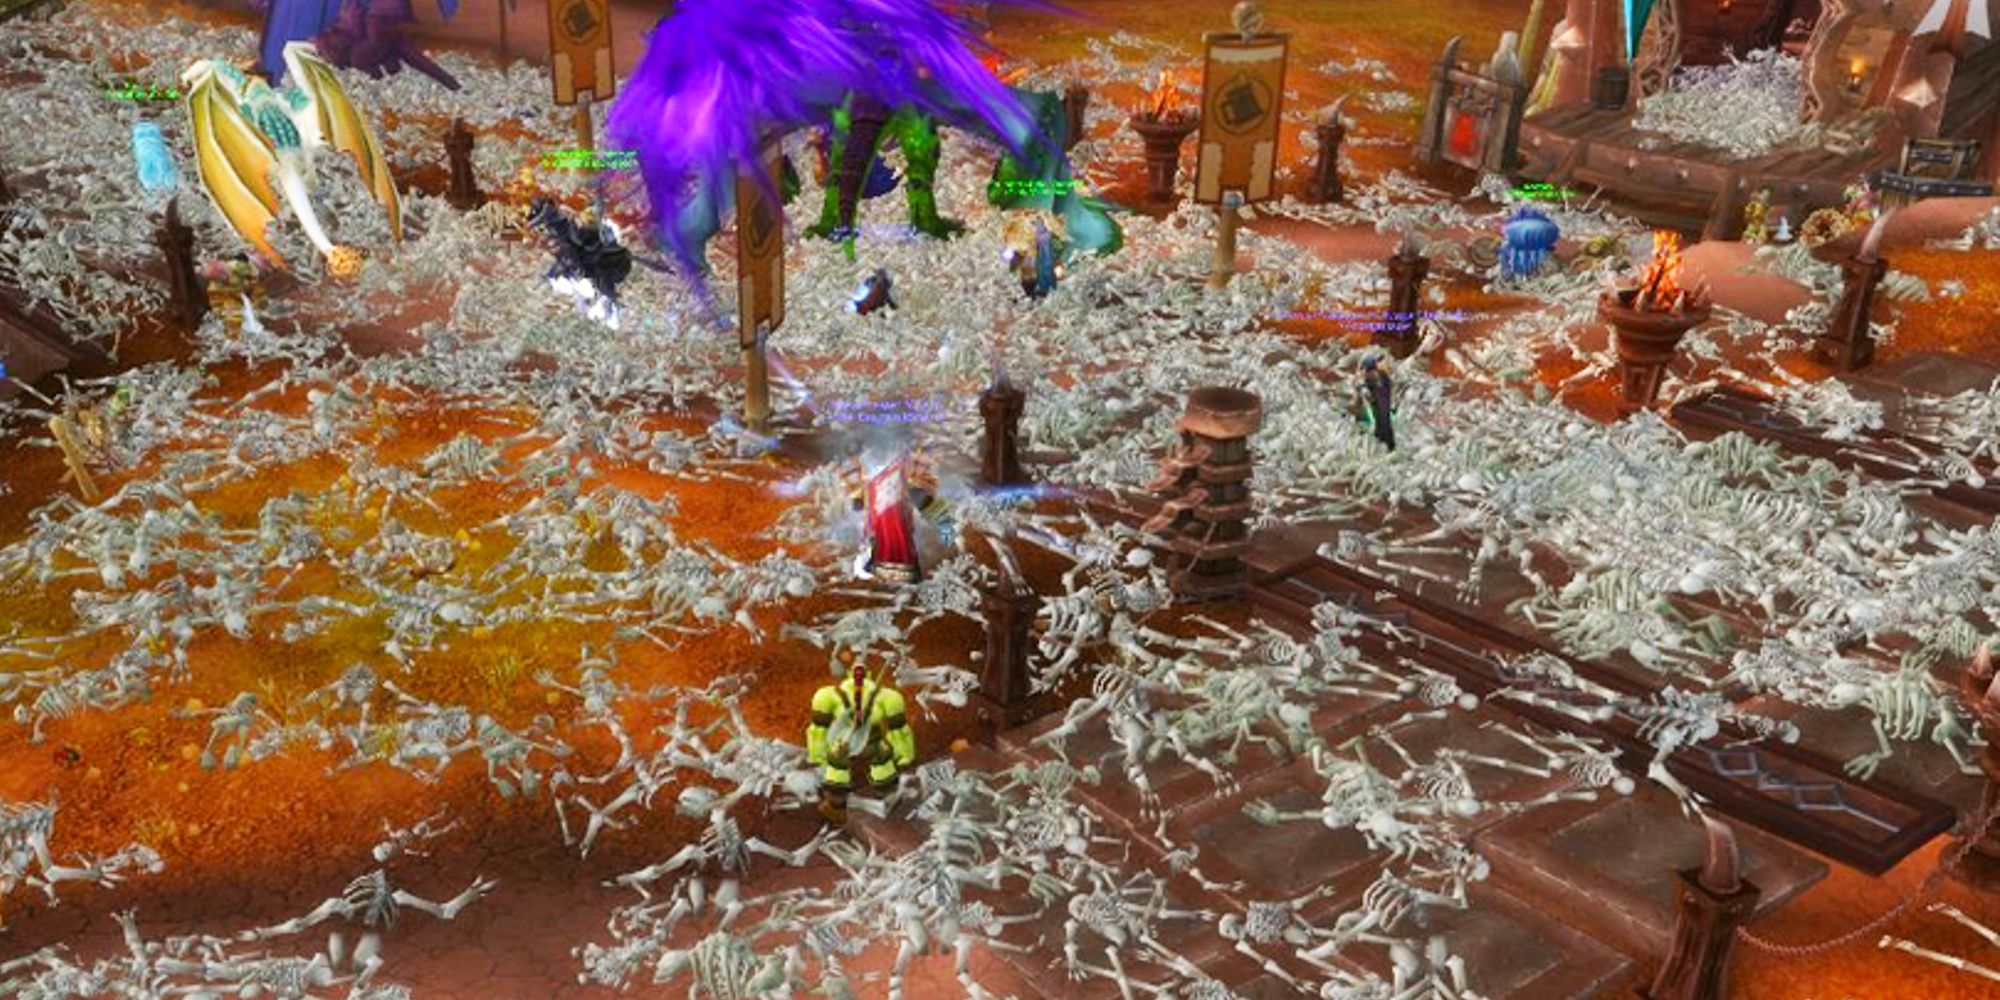 The World of Warcraft corrupted Blood plague incident from 2005